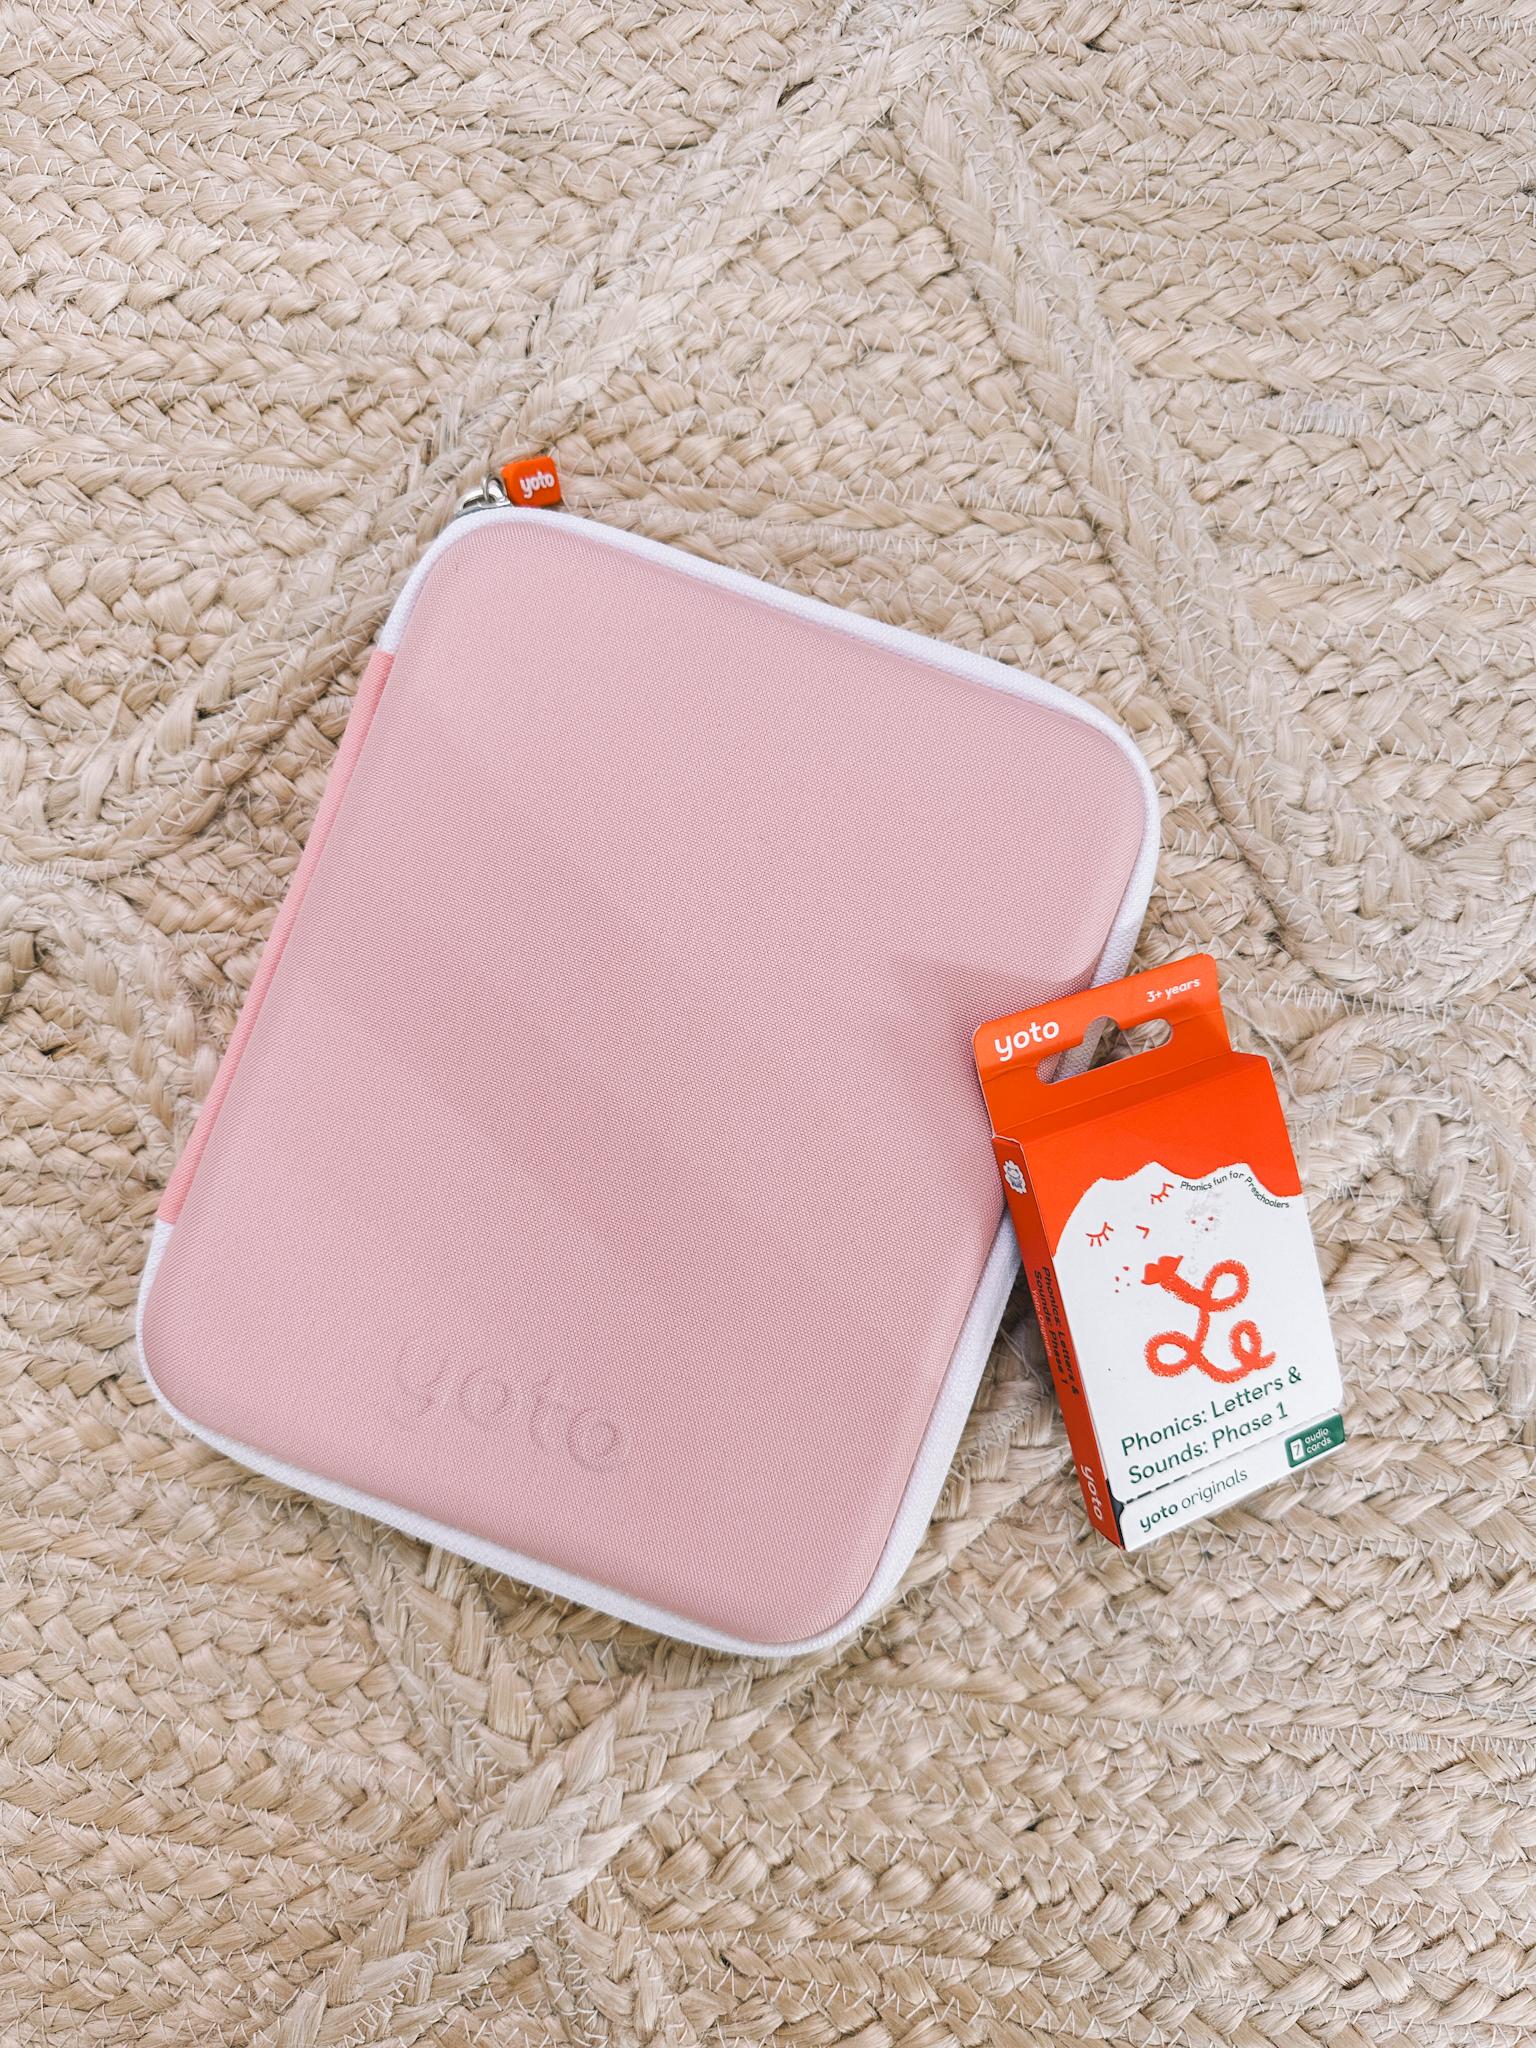 Yoto Player Review featuring Yoto Card Case in Think Pink